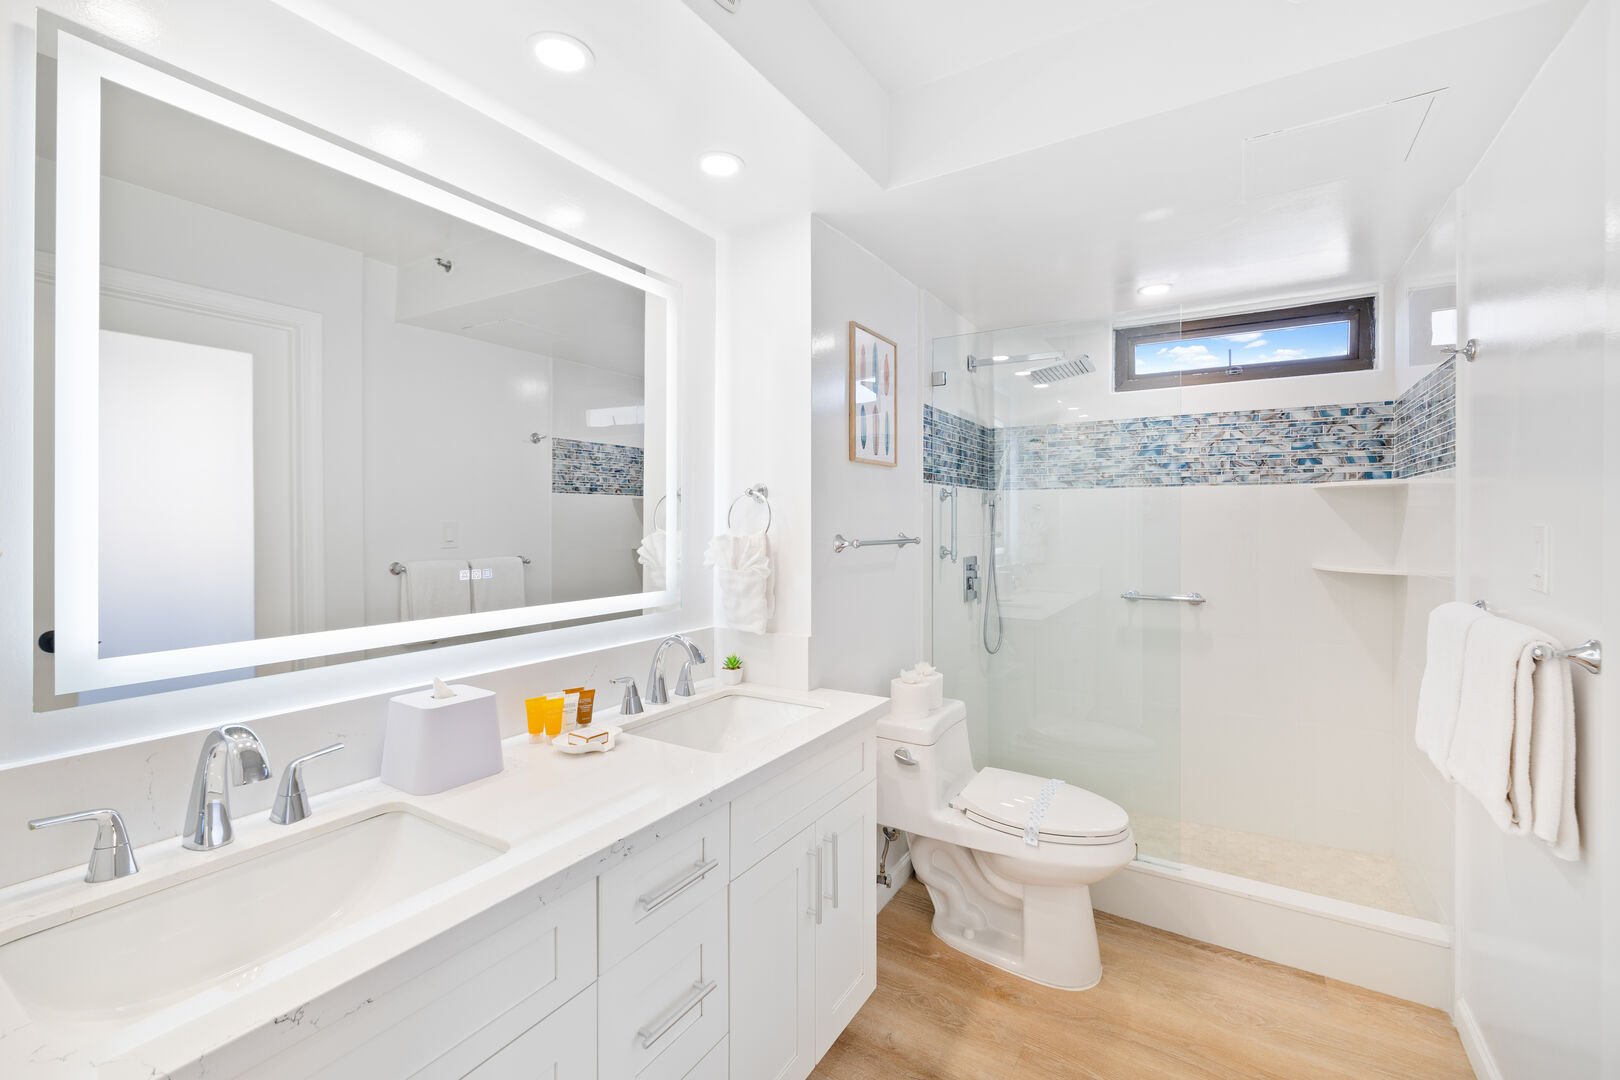 Refresh in this full bathroom with a walk-in shower!